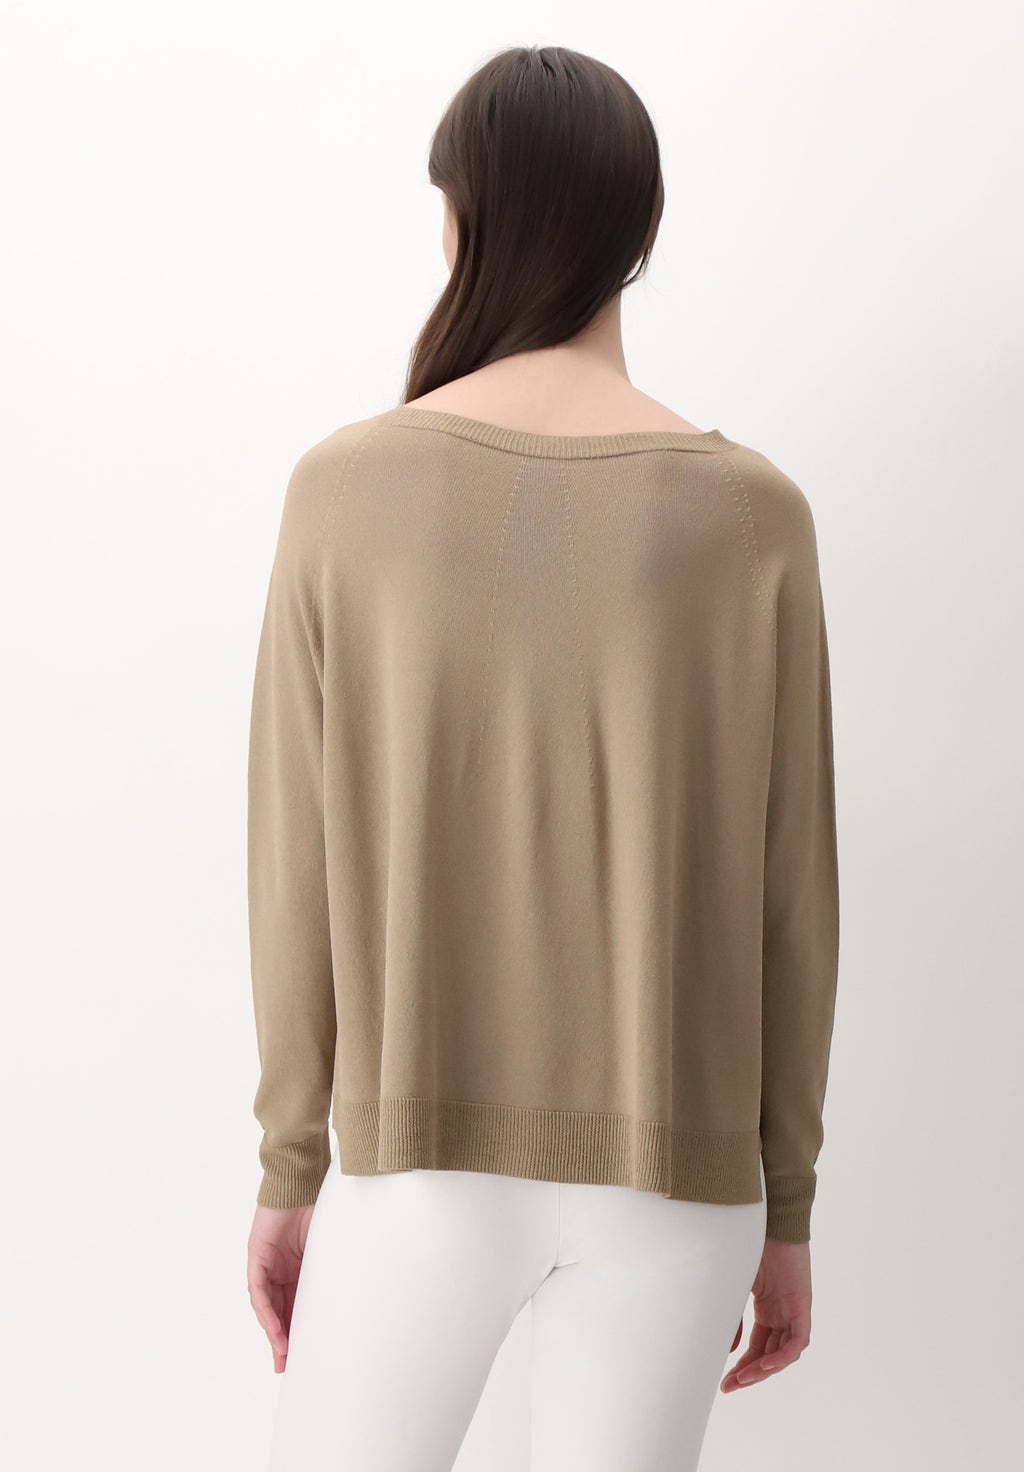 Long-sleeved Viscose Color Knit Sweater